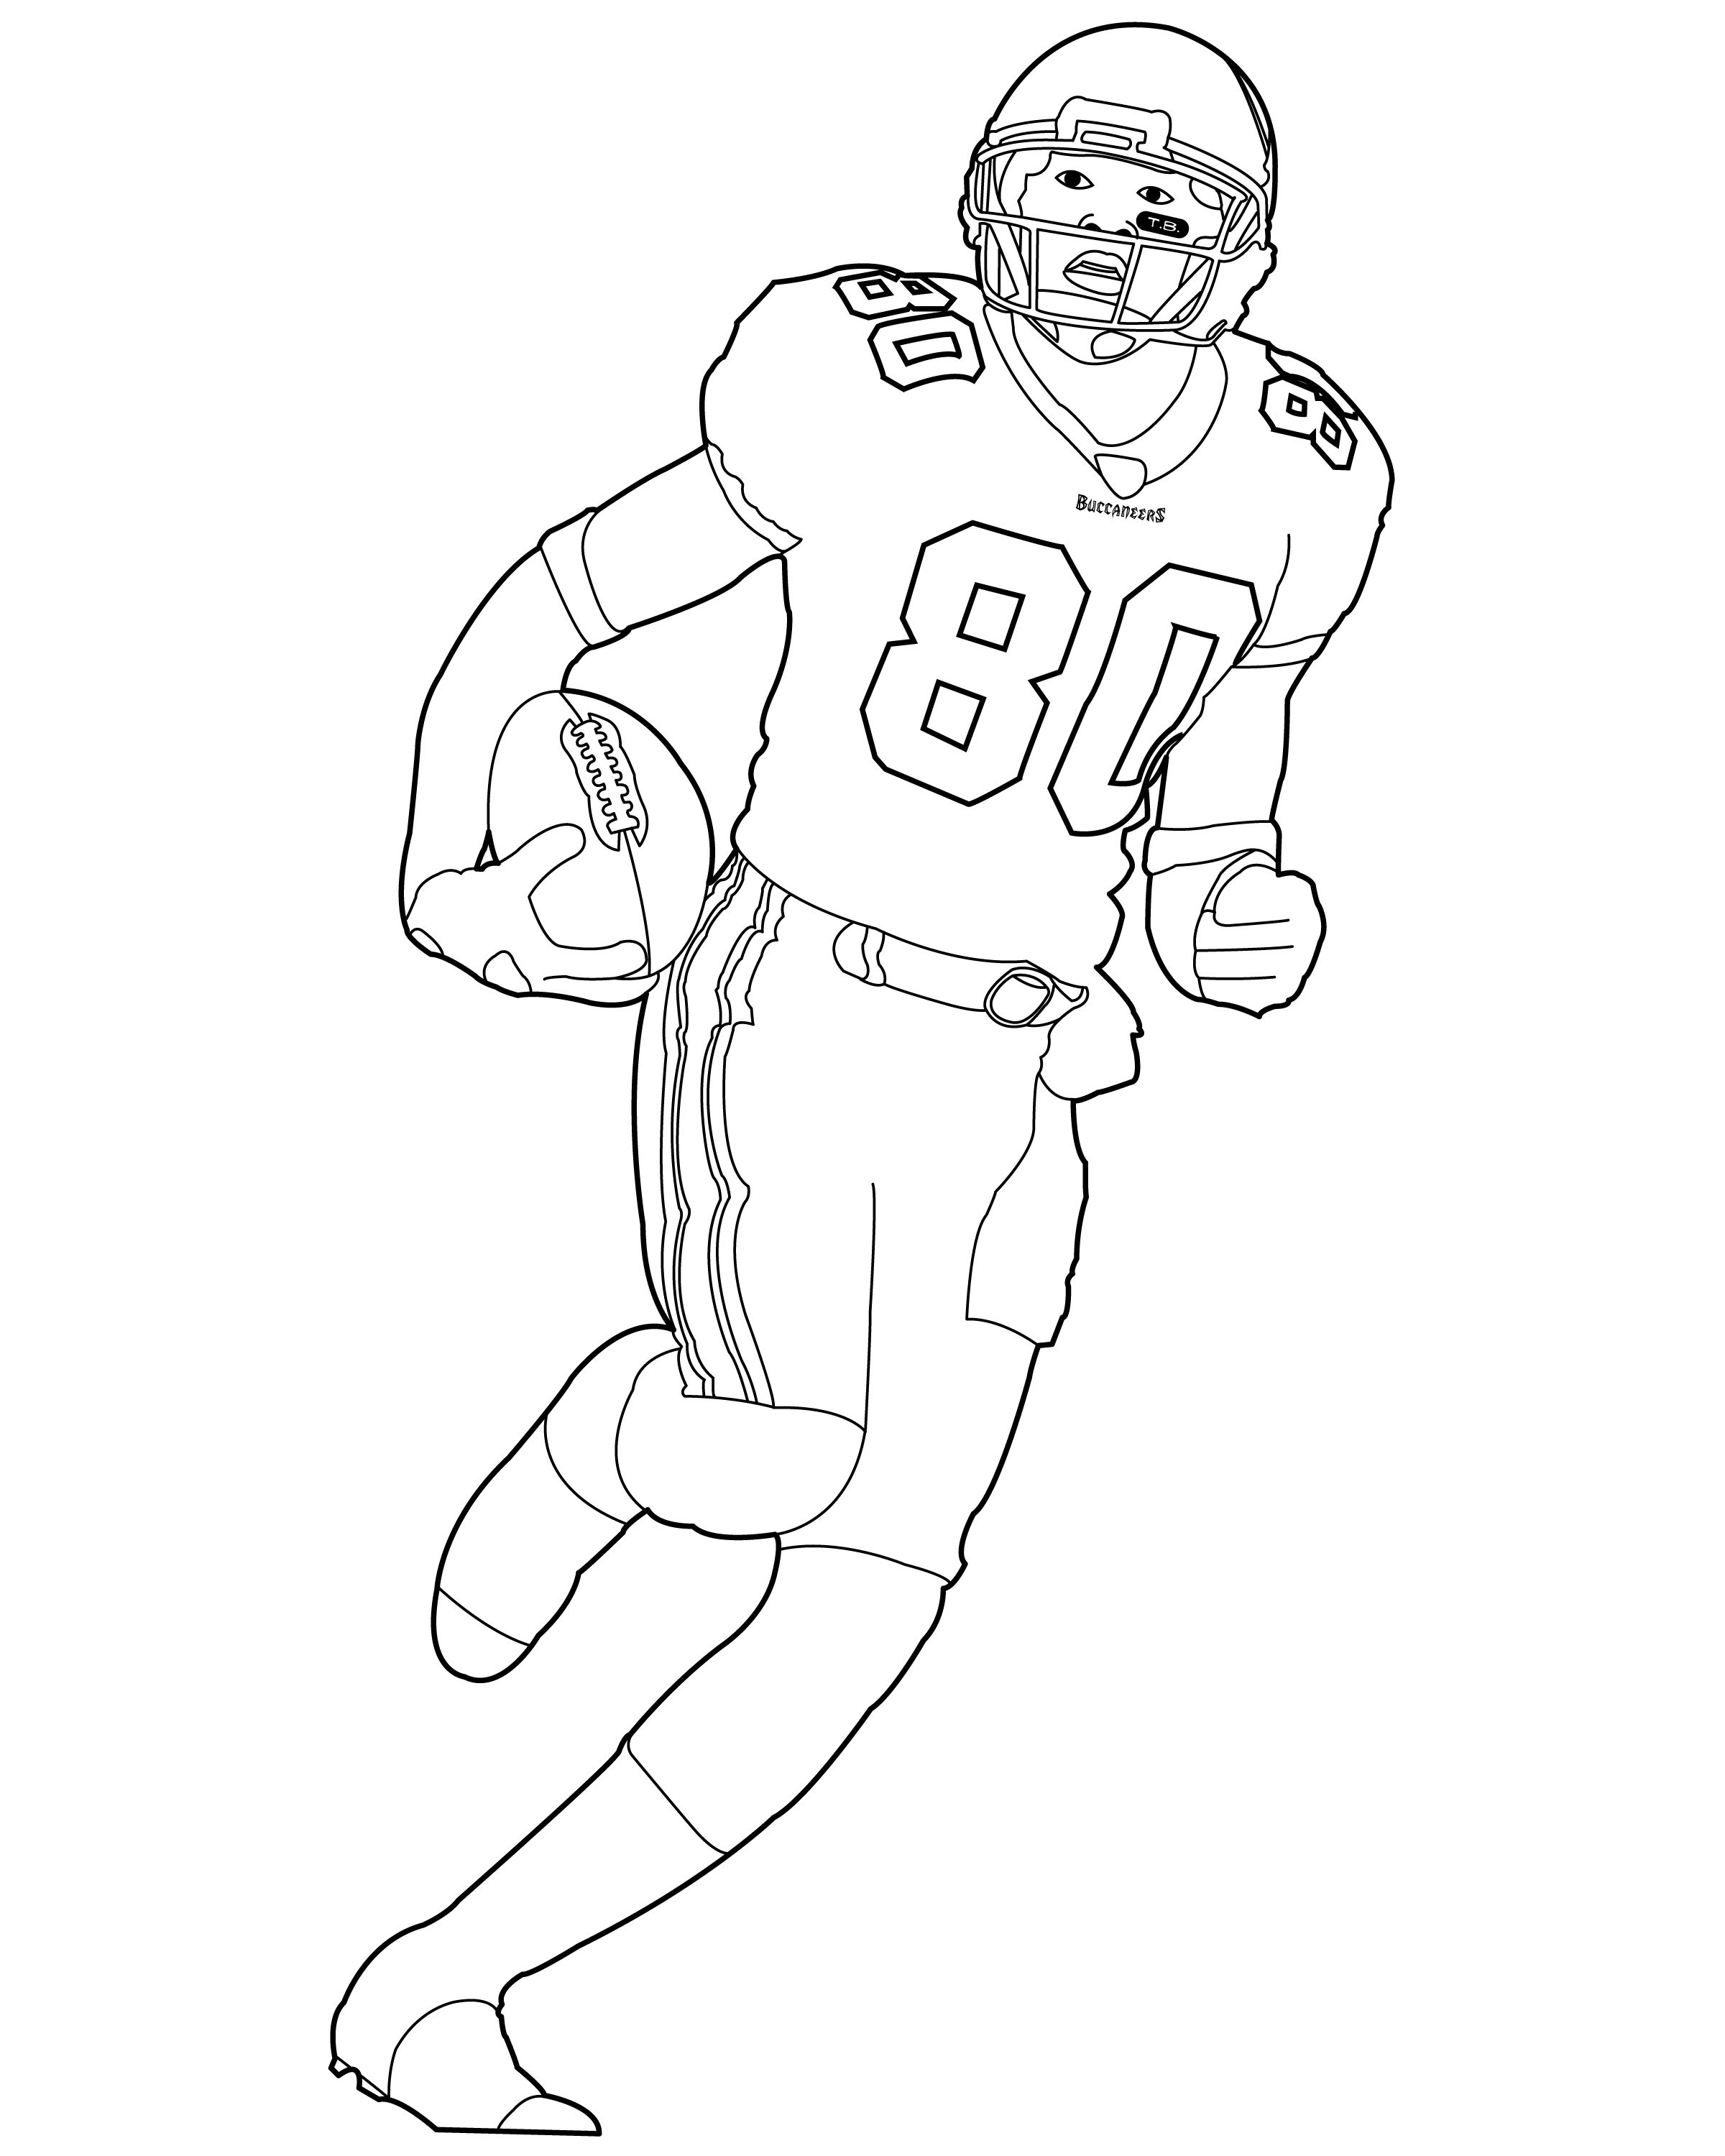 Nfl Player Coloring Pages at Free printable